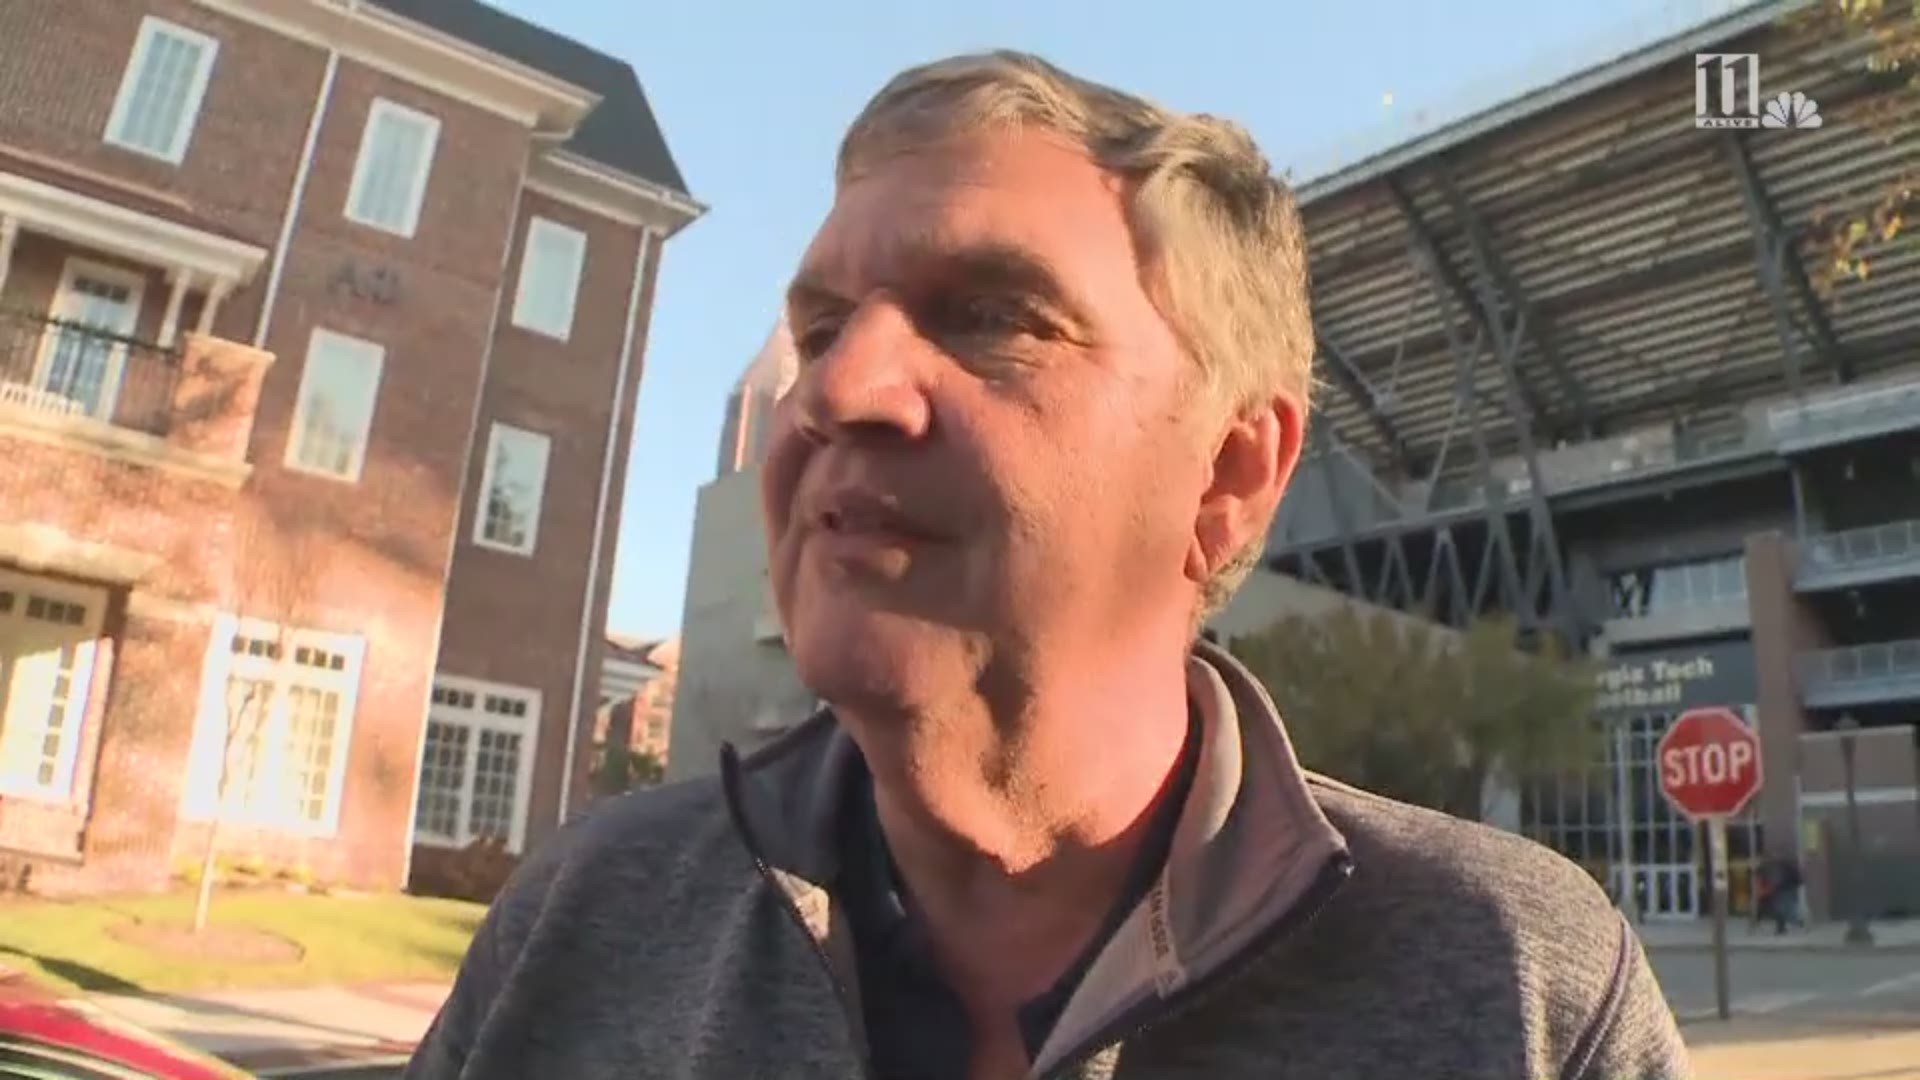 Georgia Tech's longtime football coach is taking a break from the sport after over a decade with Tech. He spoke with 11Alive about the decision.